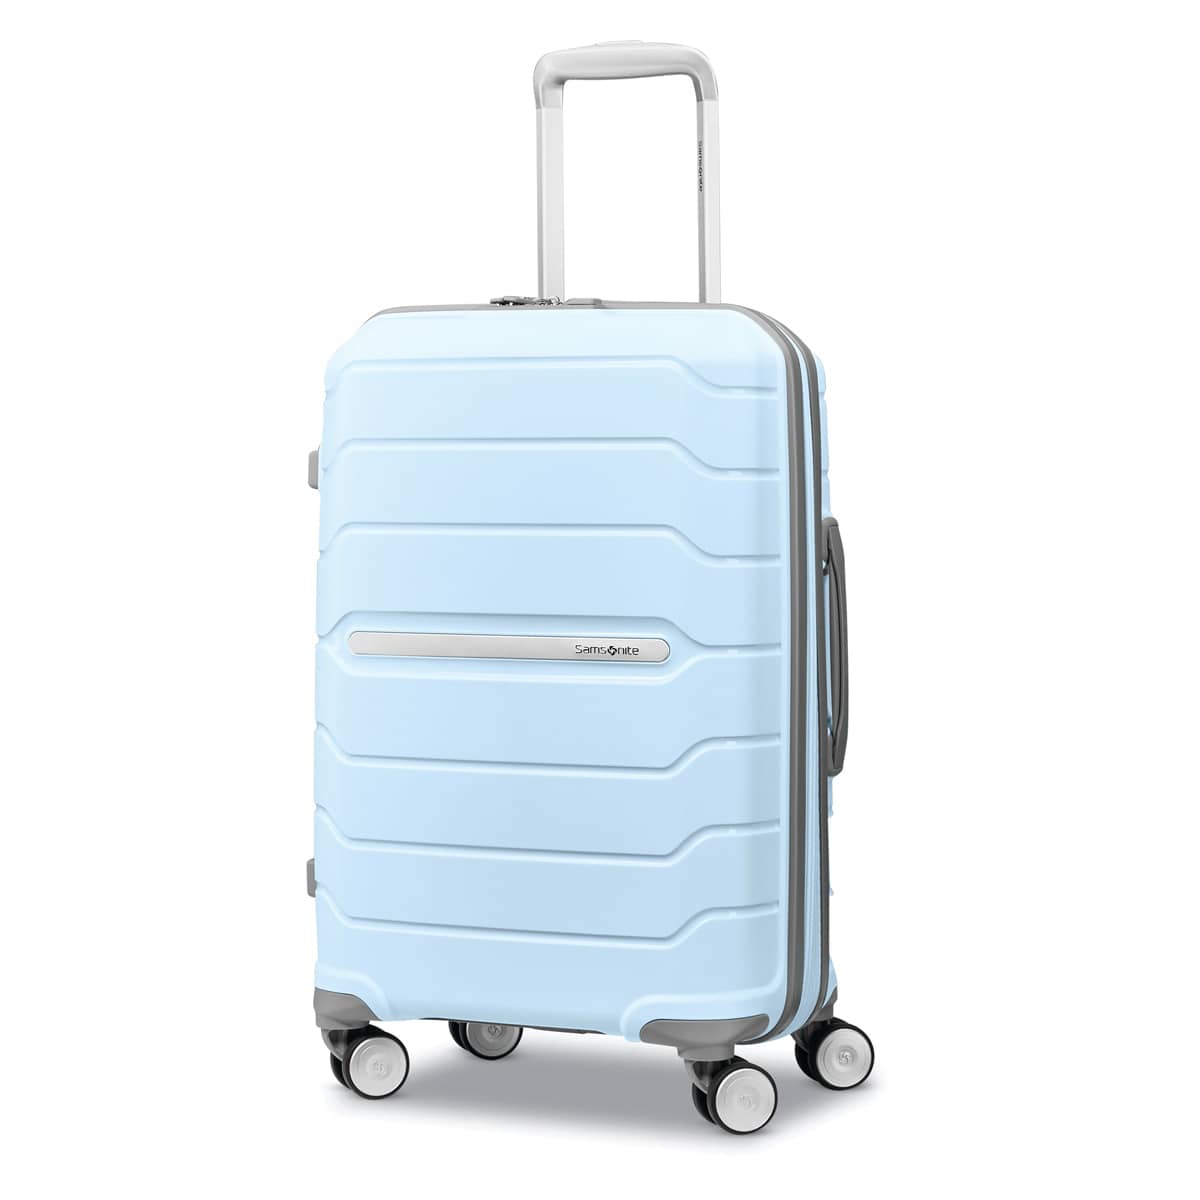 Best lightweight carry on luggage for women